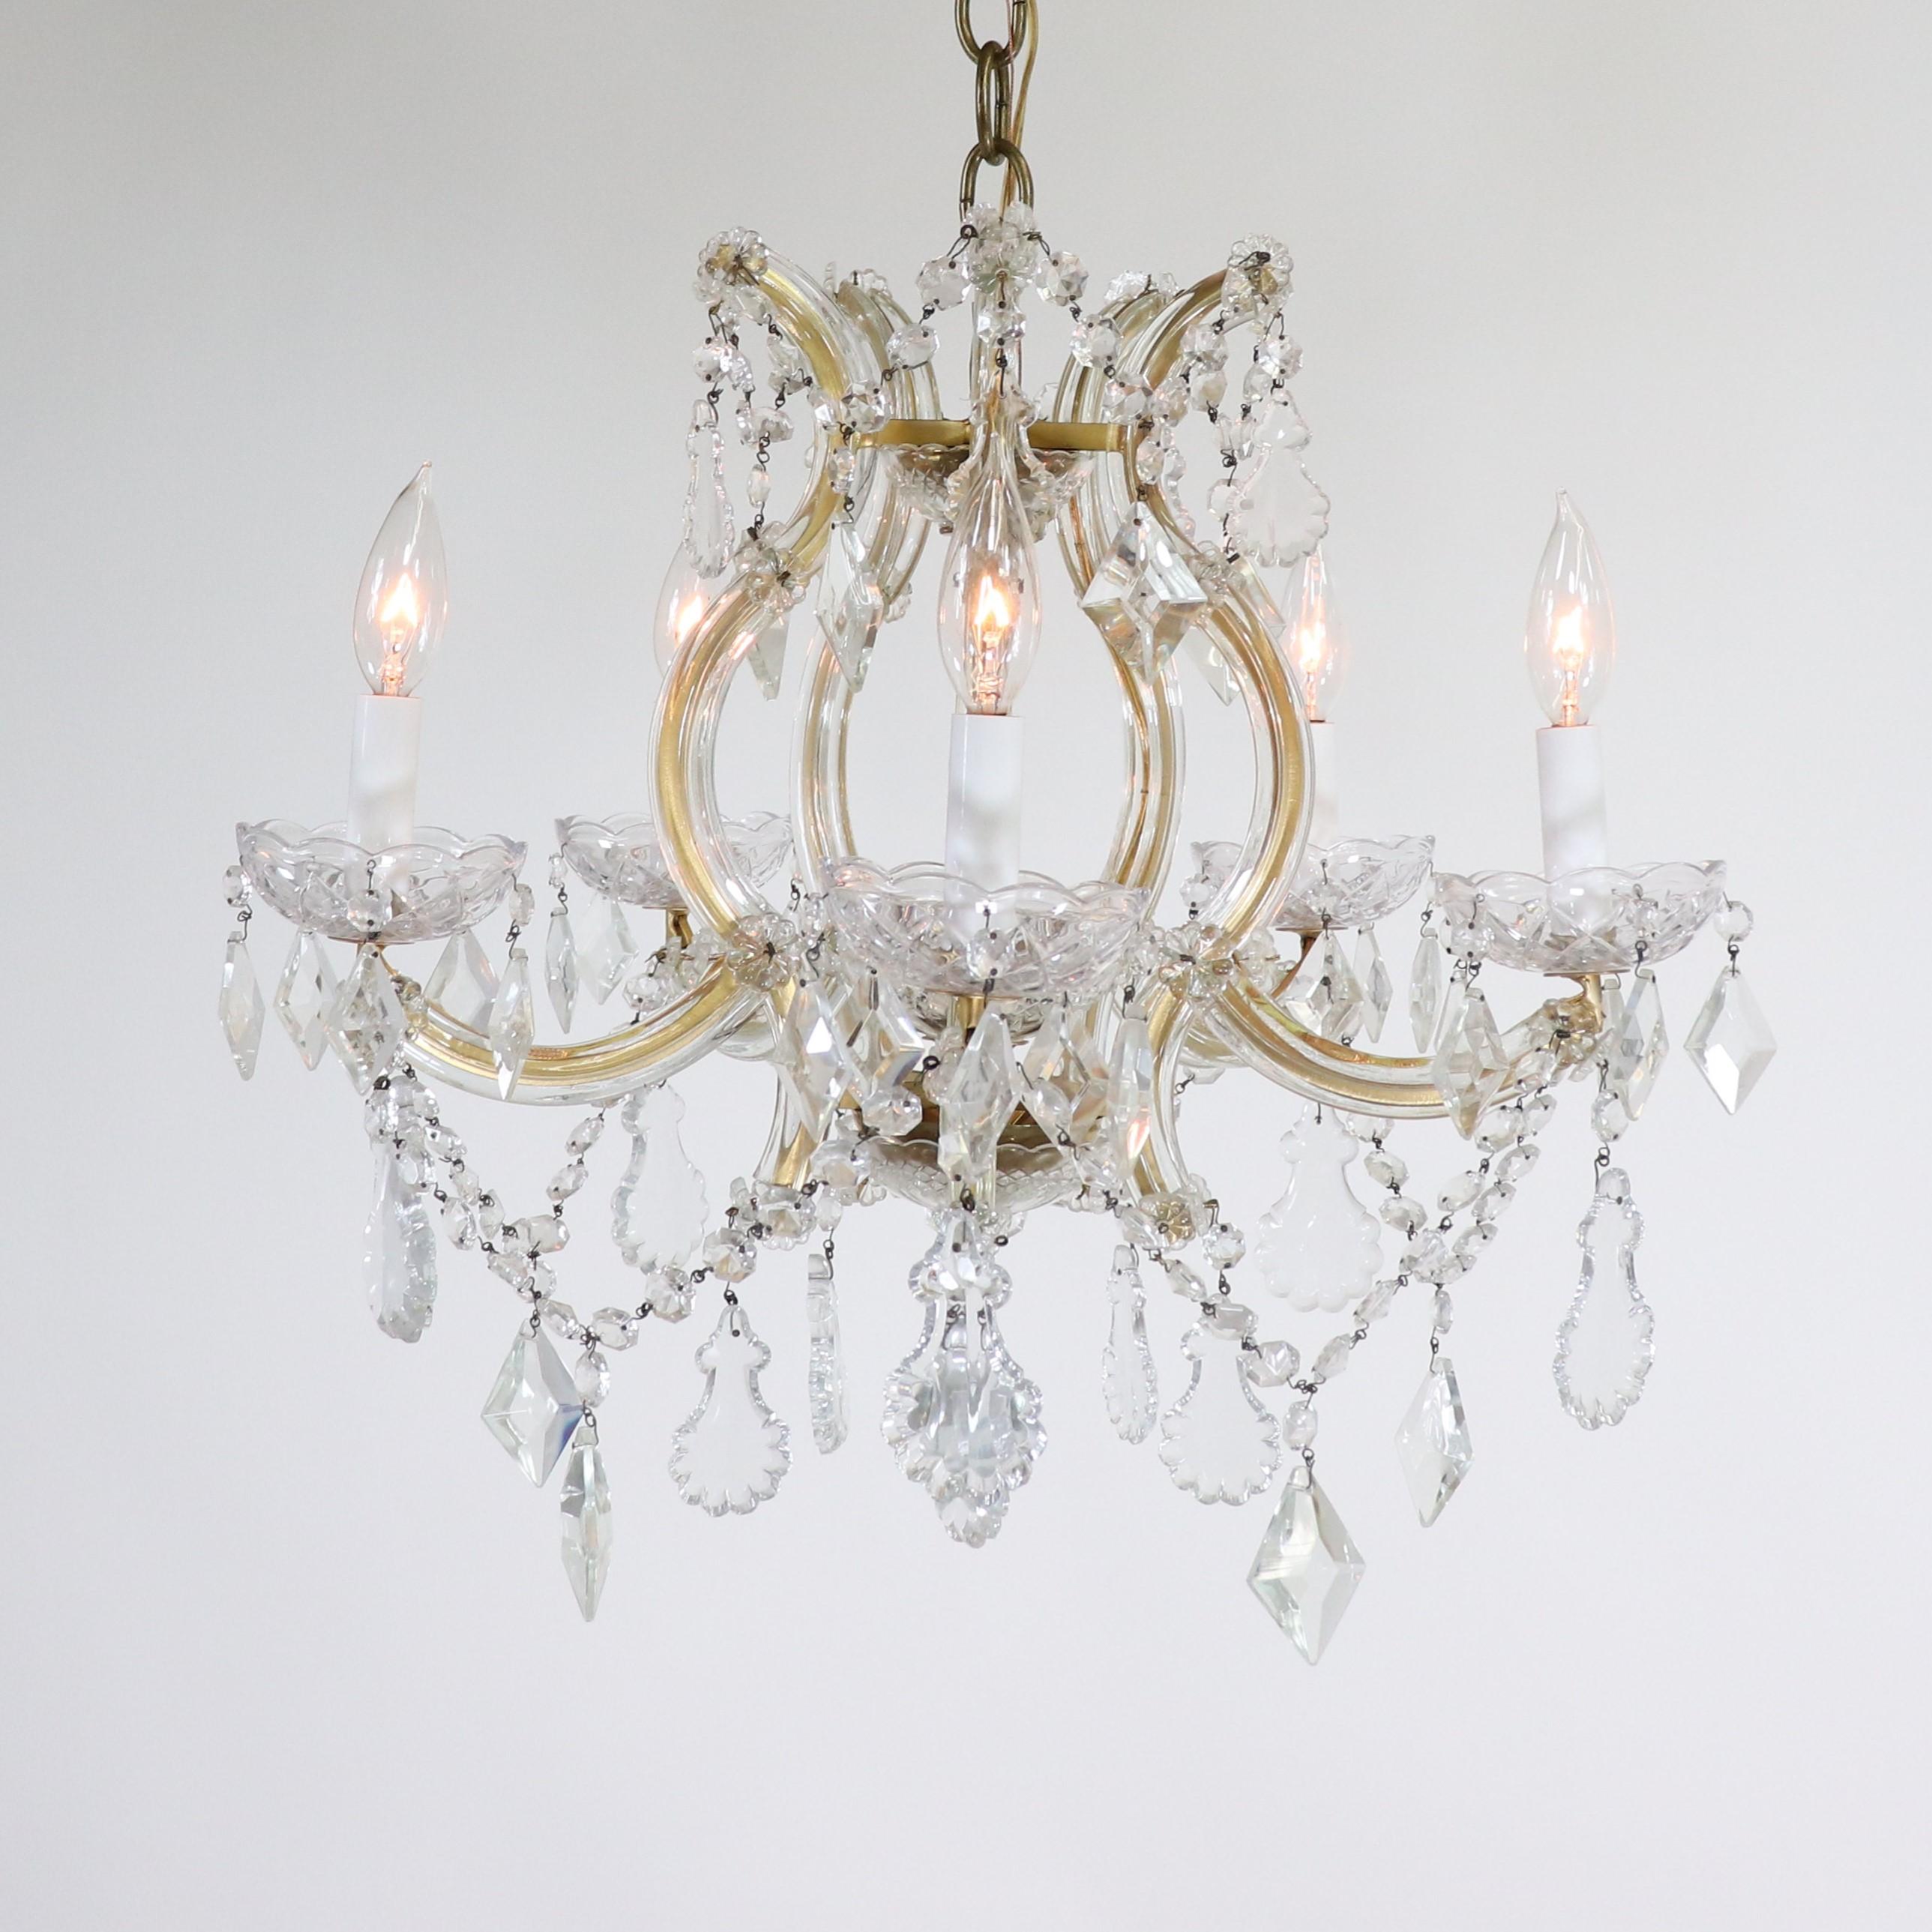 Baroque Vintage Maria Theresa Chandelier For Sale